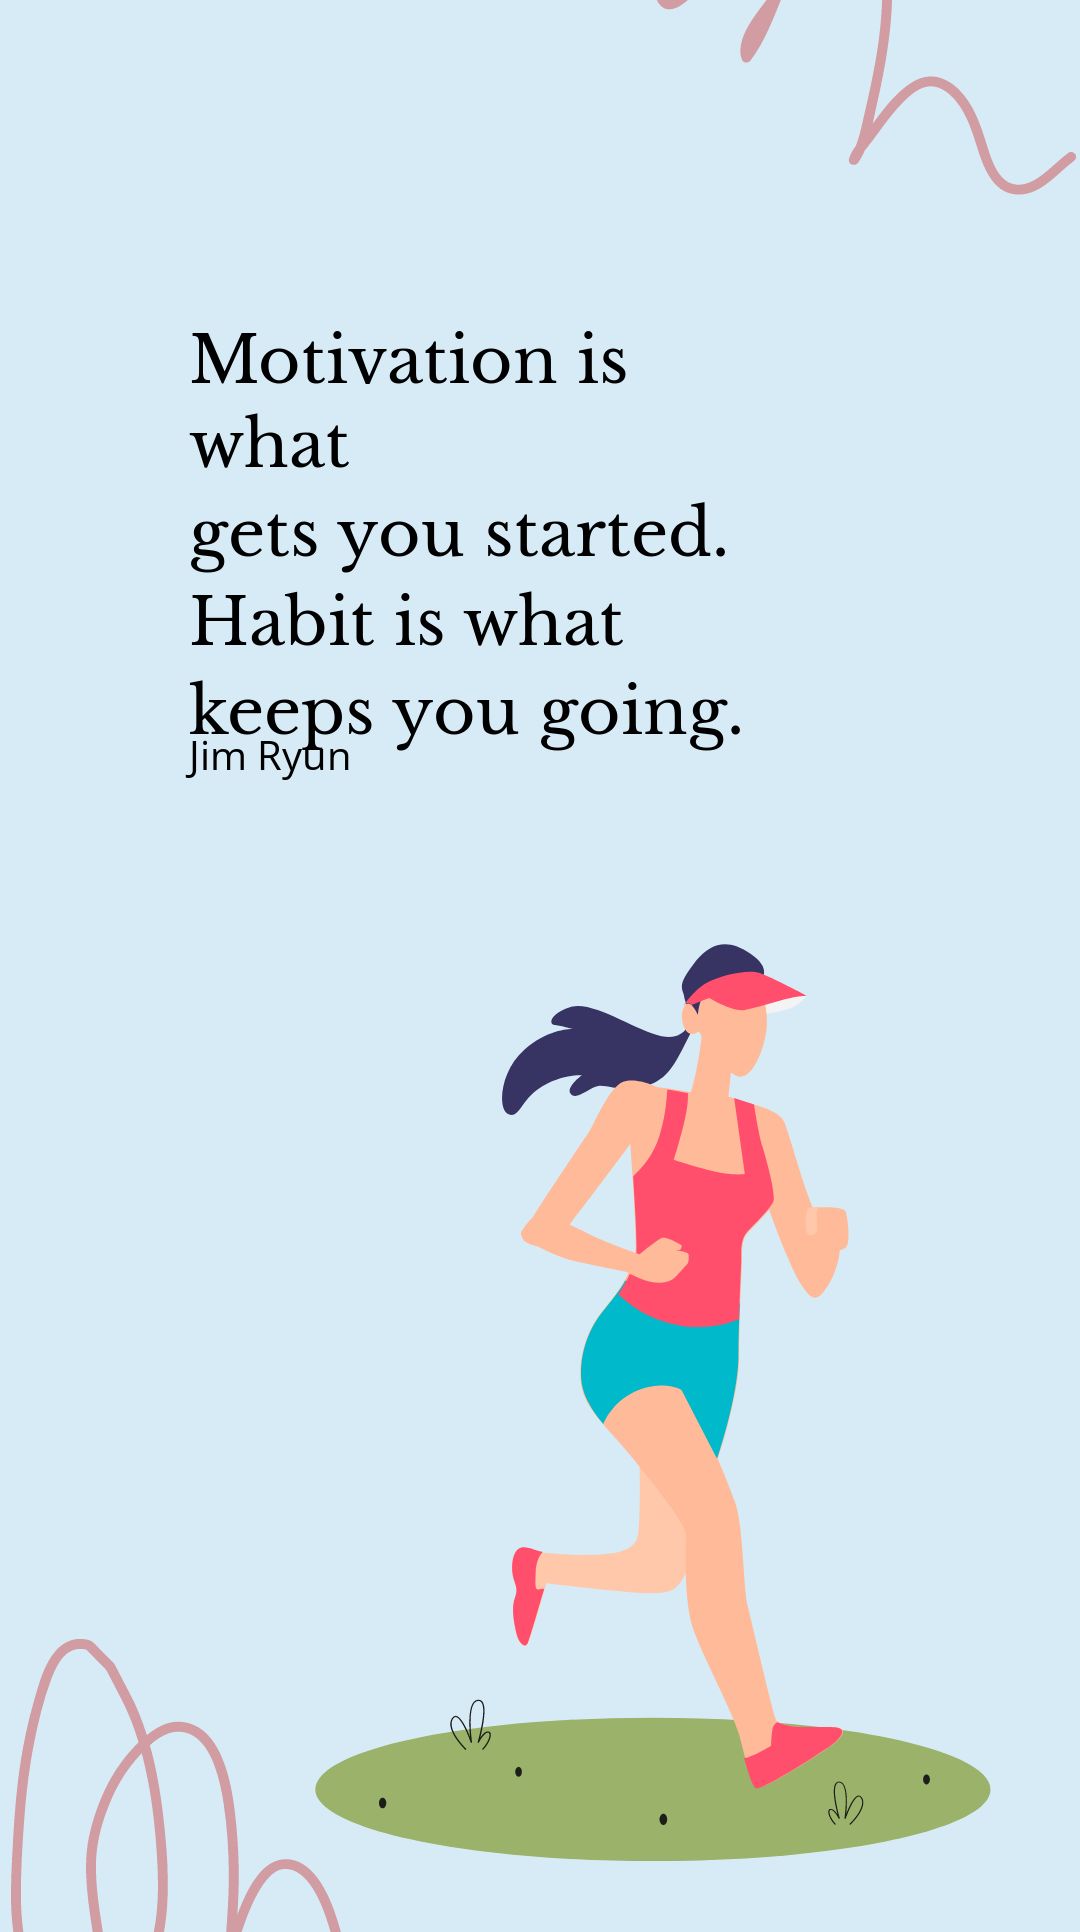 Jim Ryun - Motivation is what gets you started. Habit is what keeps you going.